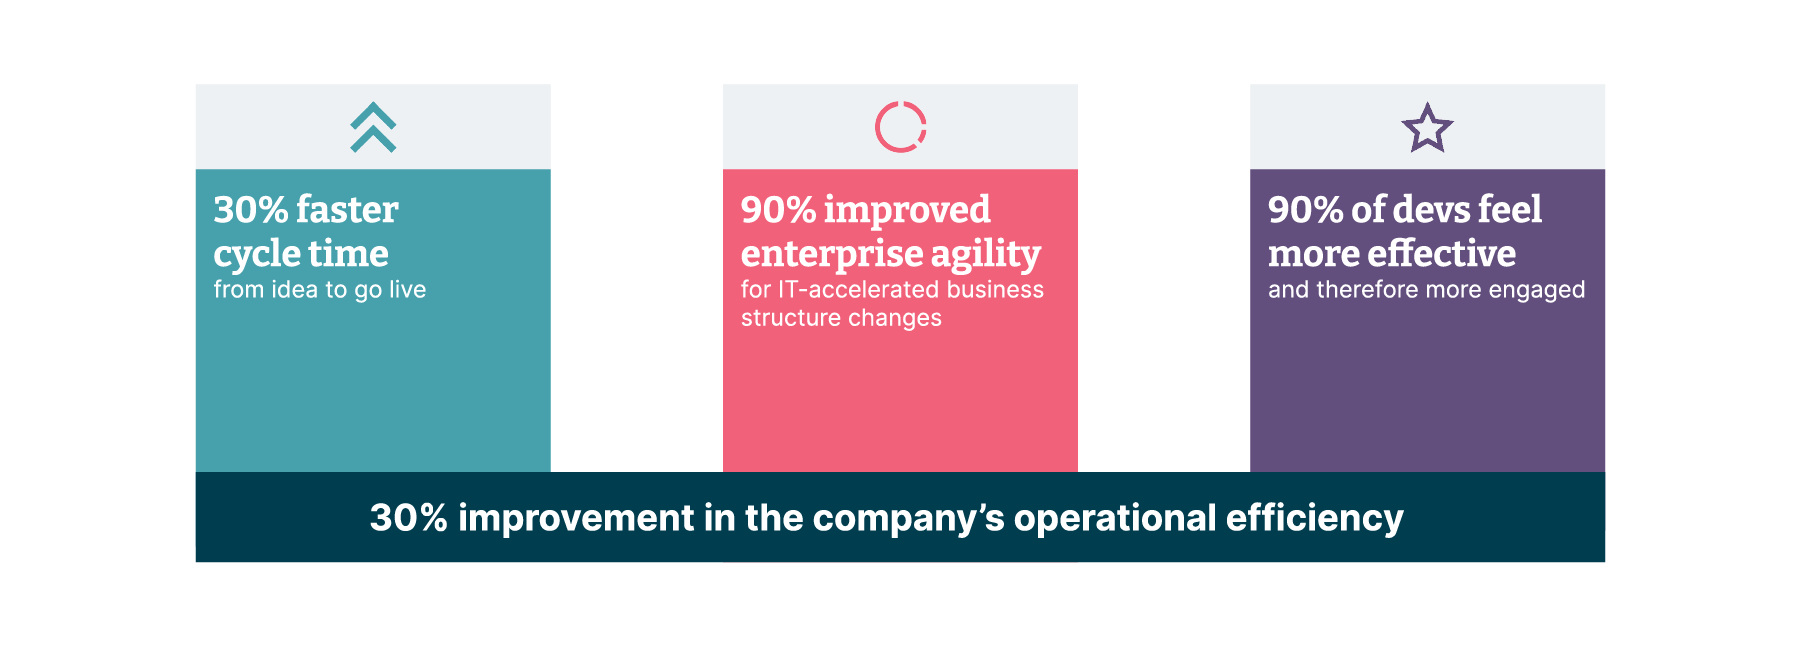 Thoughtworks NEO engineering platform provides measurable results including 30% faster cycle time from idea to go live, 90% improved enterprise agility for IT-accelerated business structure changes, and 90% of developers feeling more effective and therefore more engaged. 